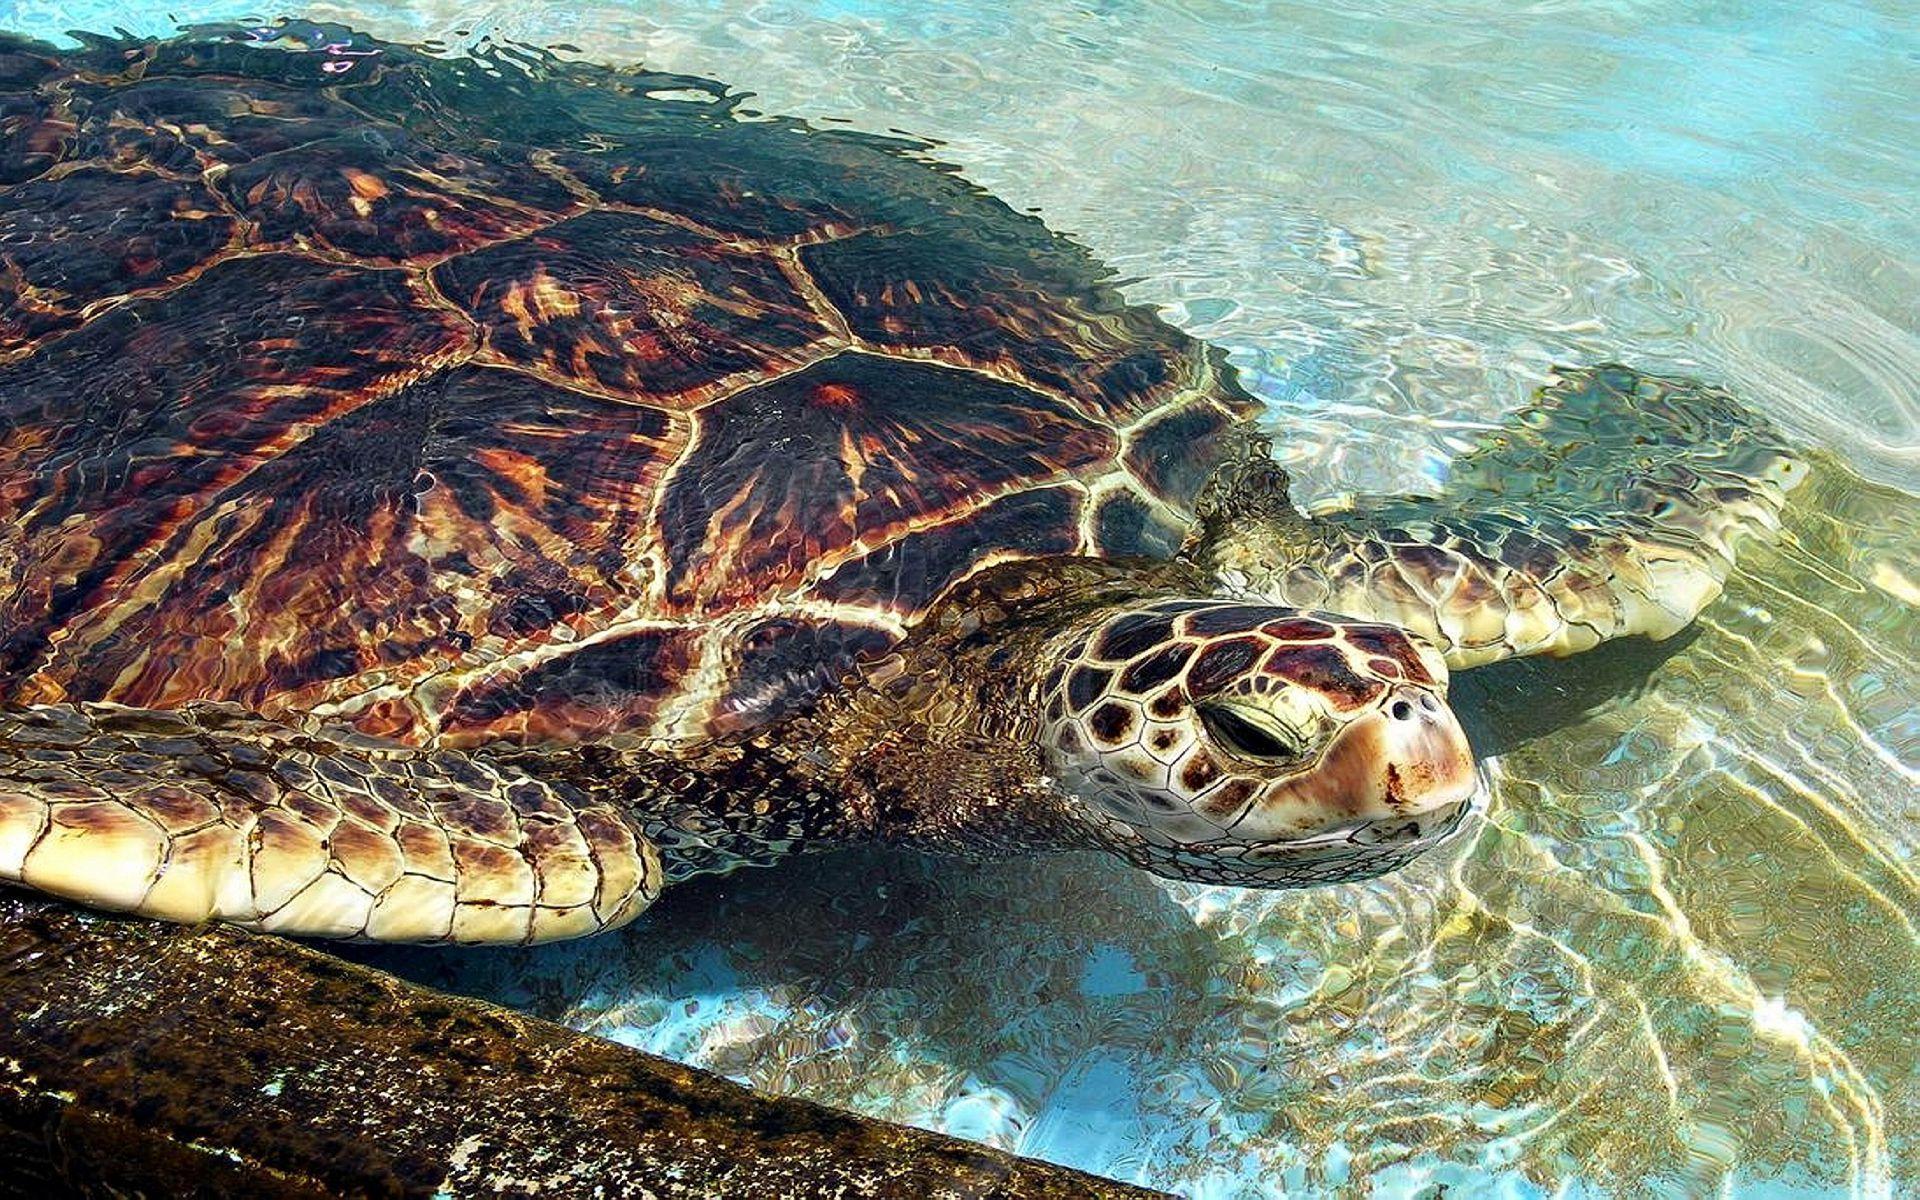 What do we know about Loggerhead turtles?